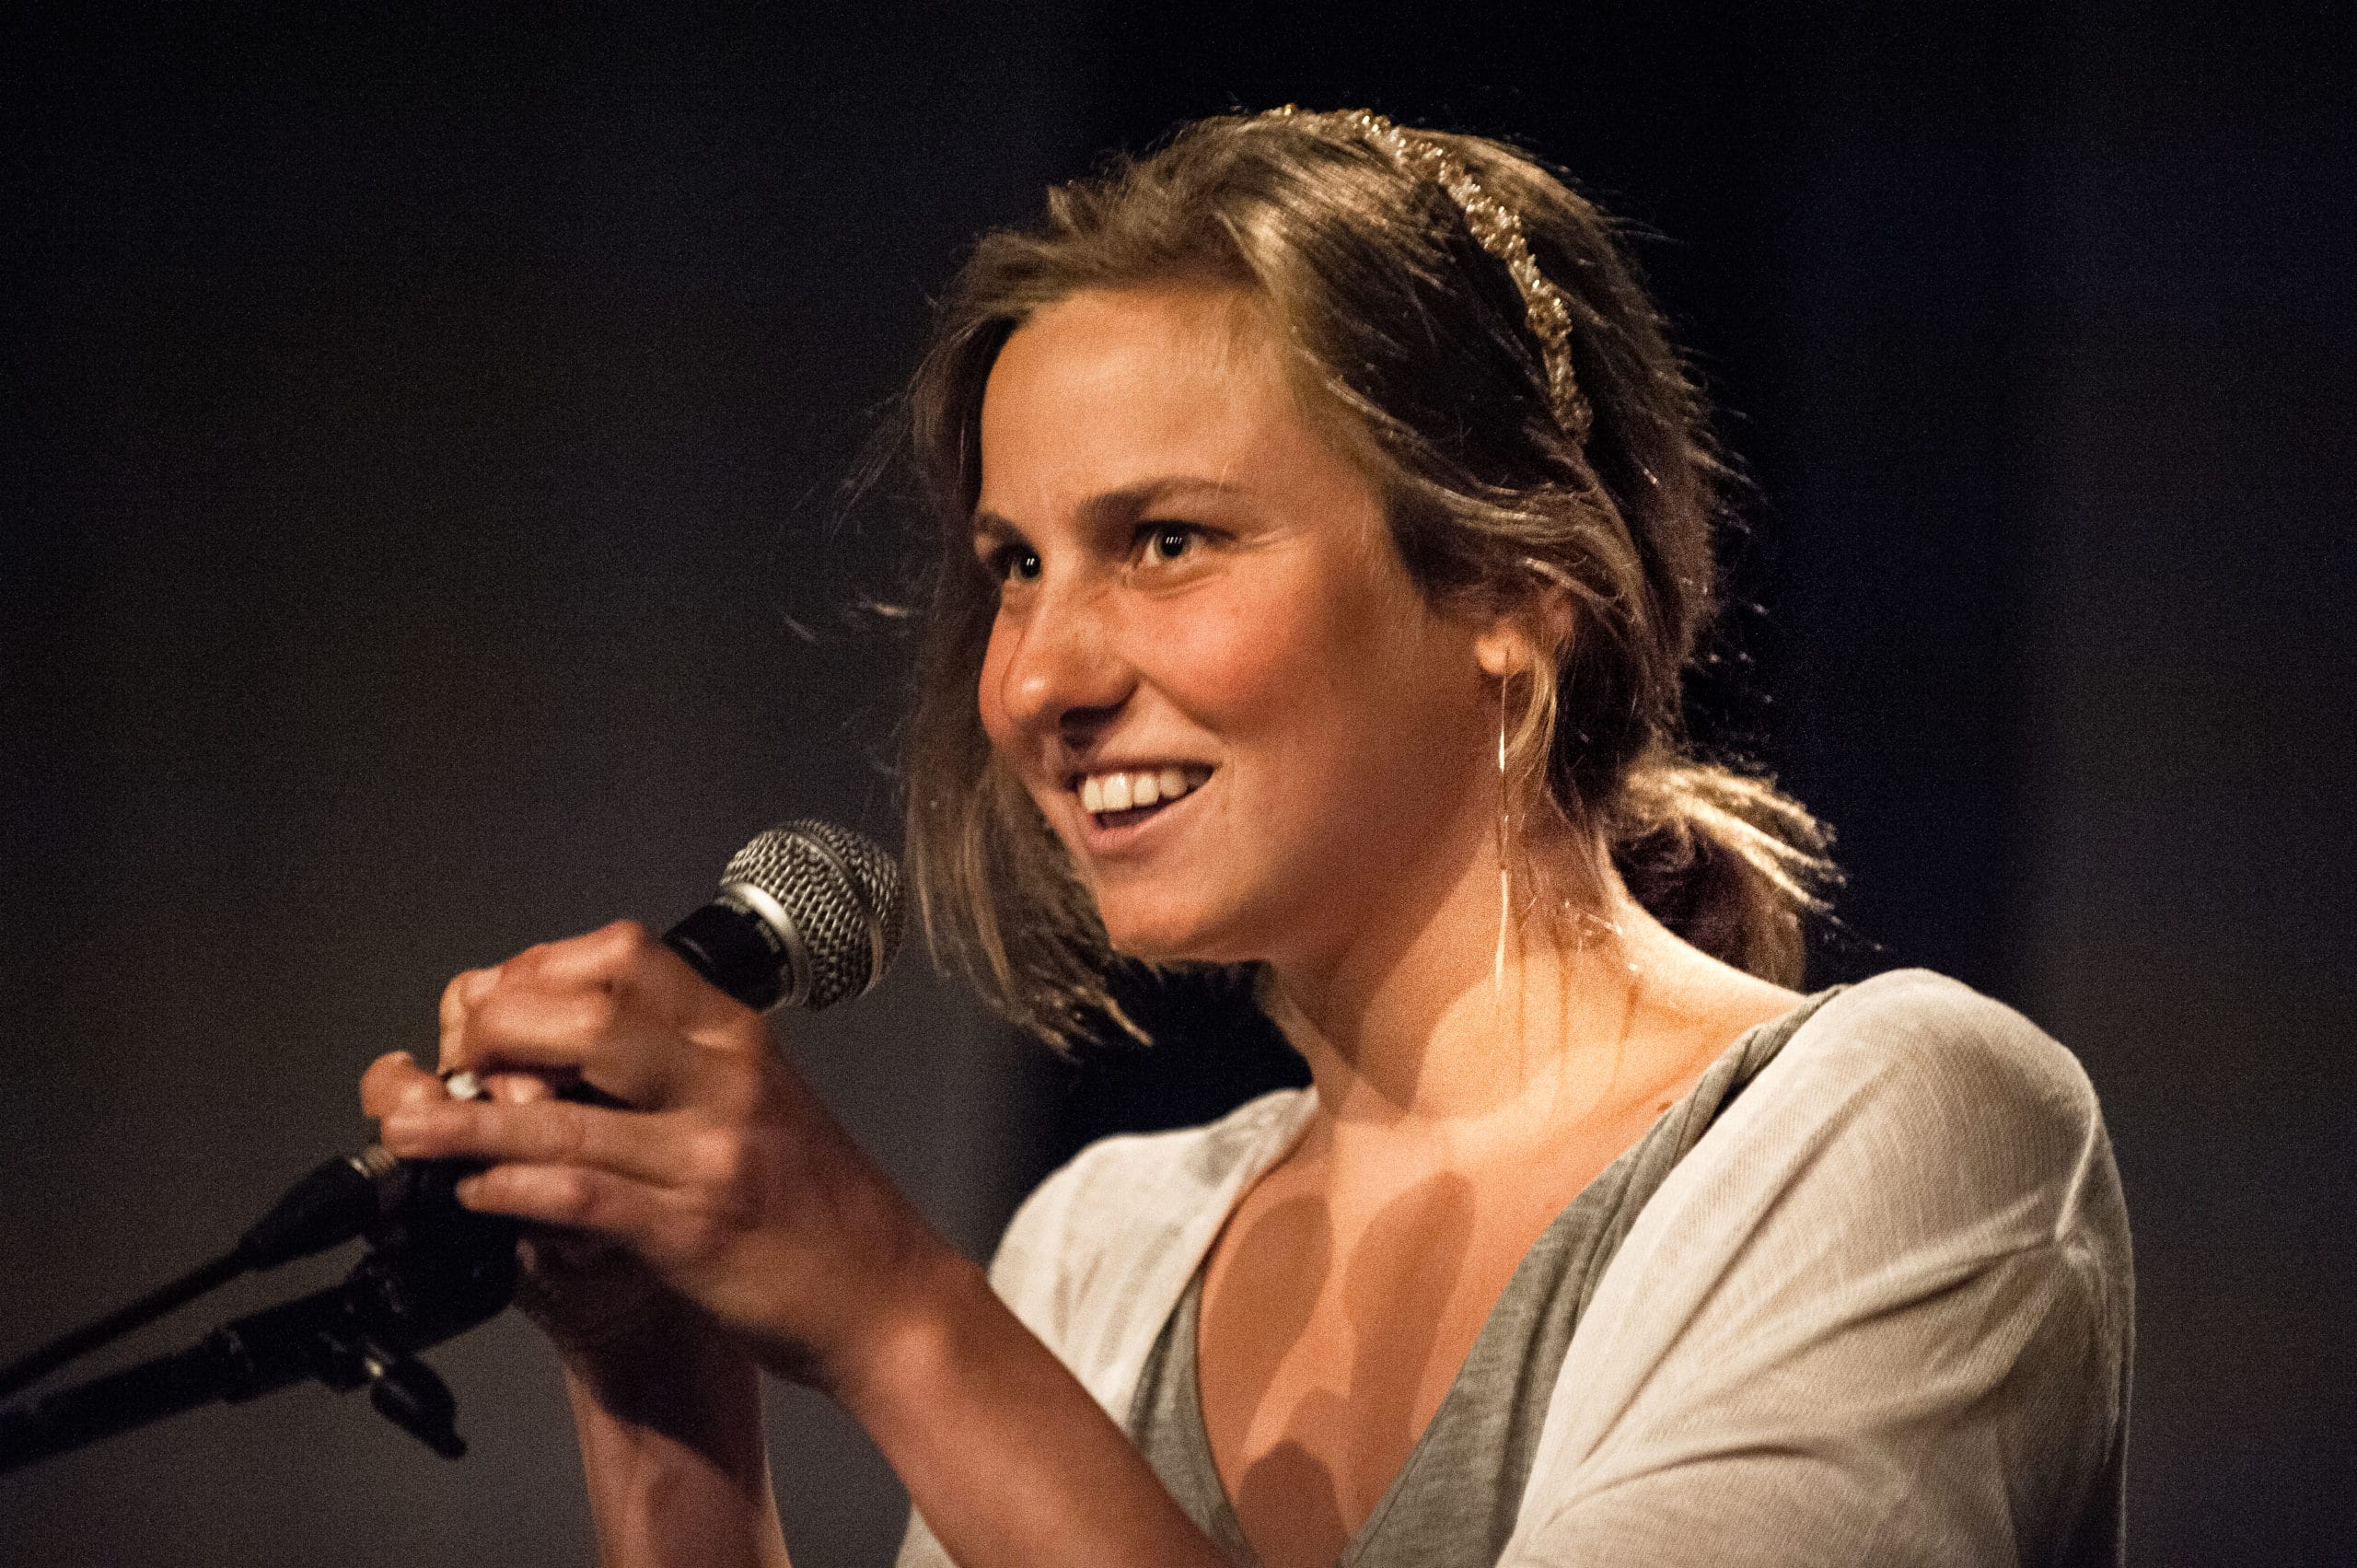 Colour photo of an actor speaking into a microphone. Their hair is pulled back, they are wearing a white cardigan, and a grey dress.